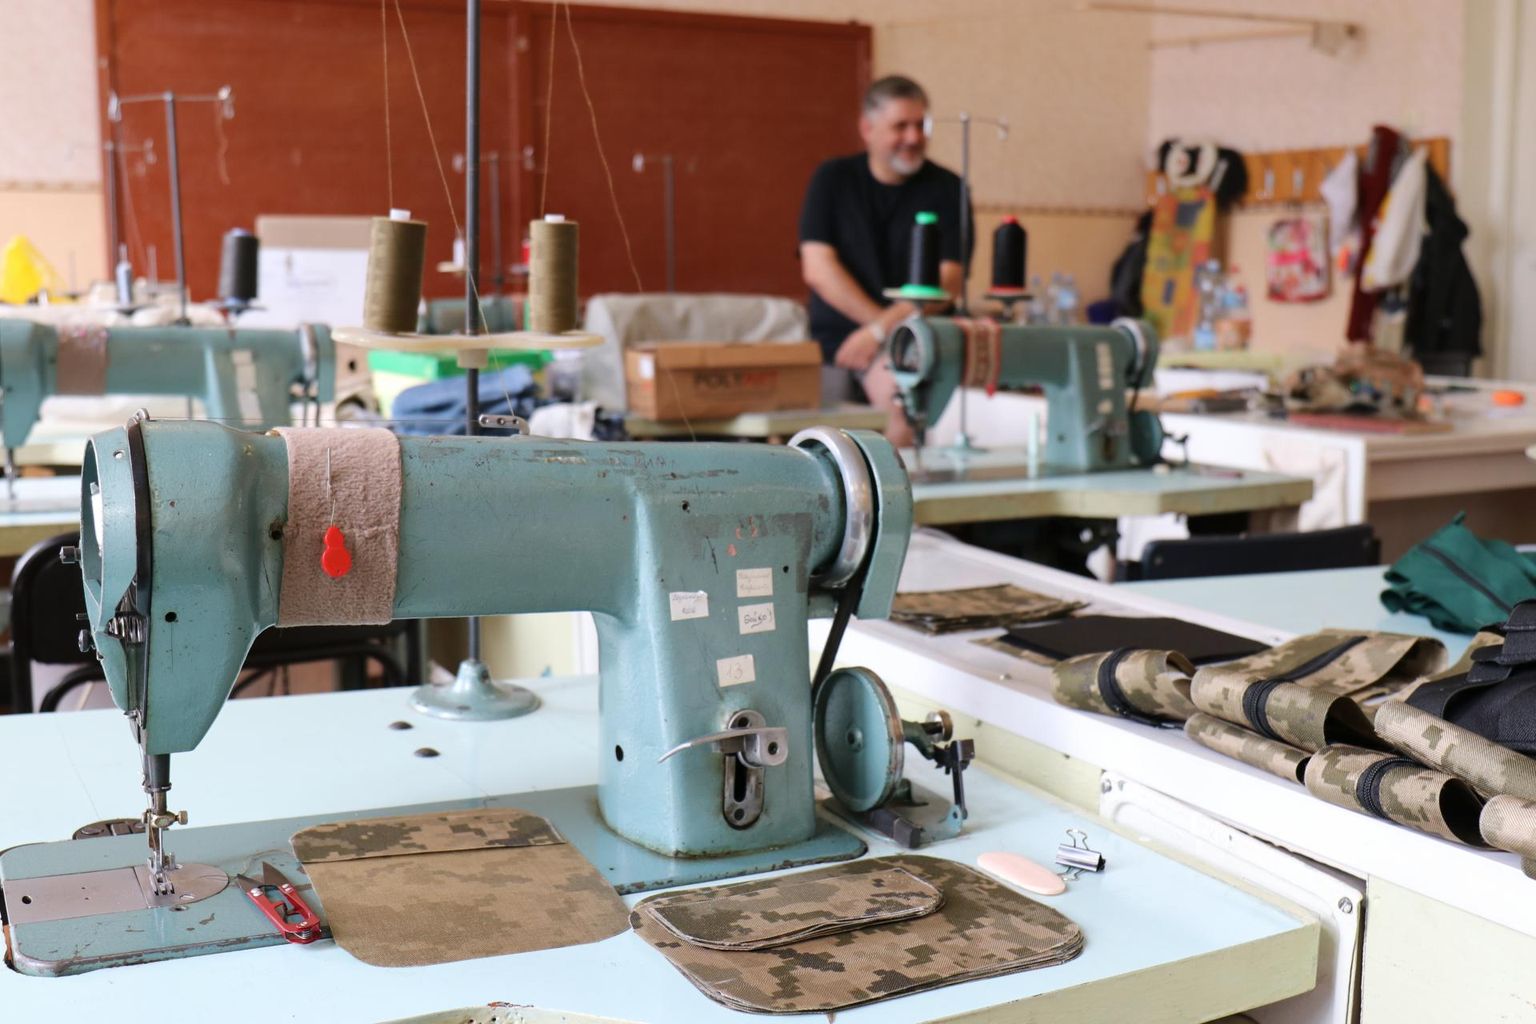 A sewing workshop organized by volunteers in Zaporizhzhia, where they make bulletproof vests for soldiers. Up to a hundred vests are made in the workshop per day.